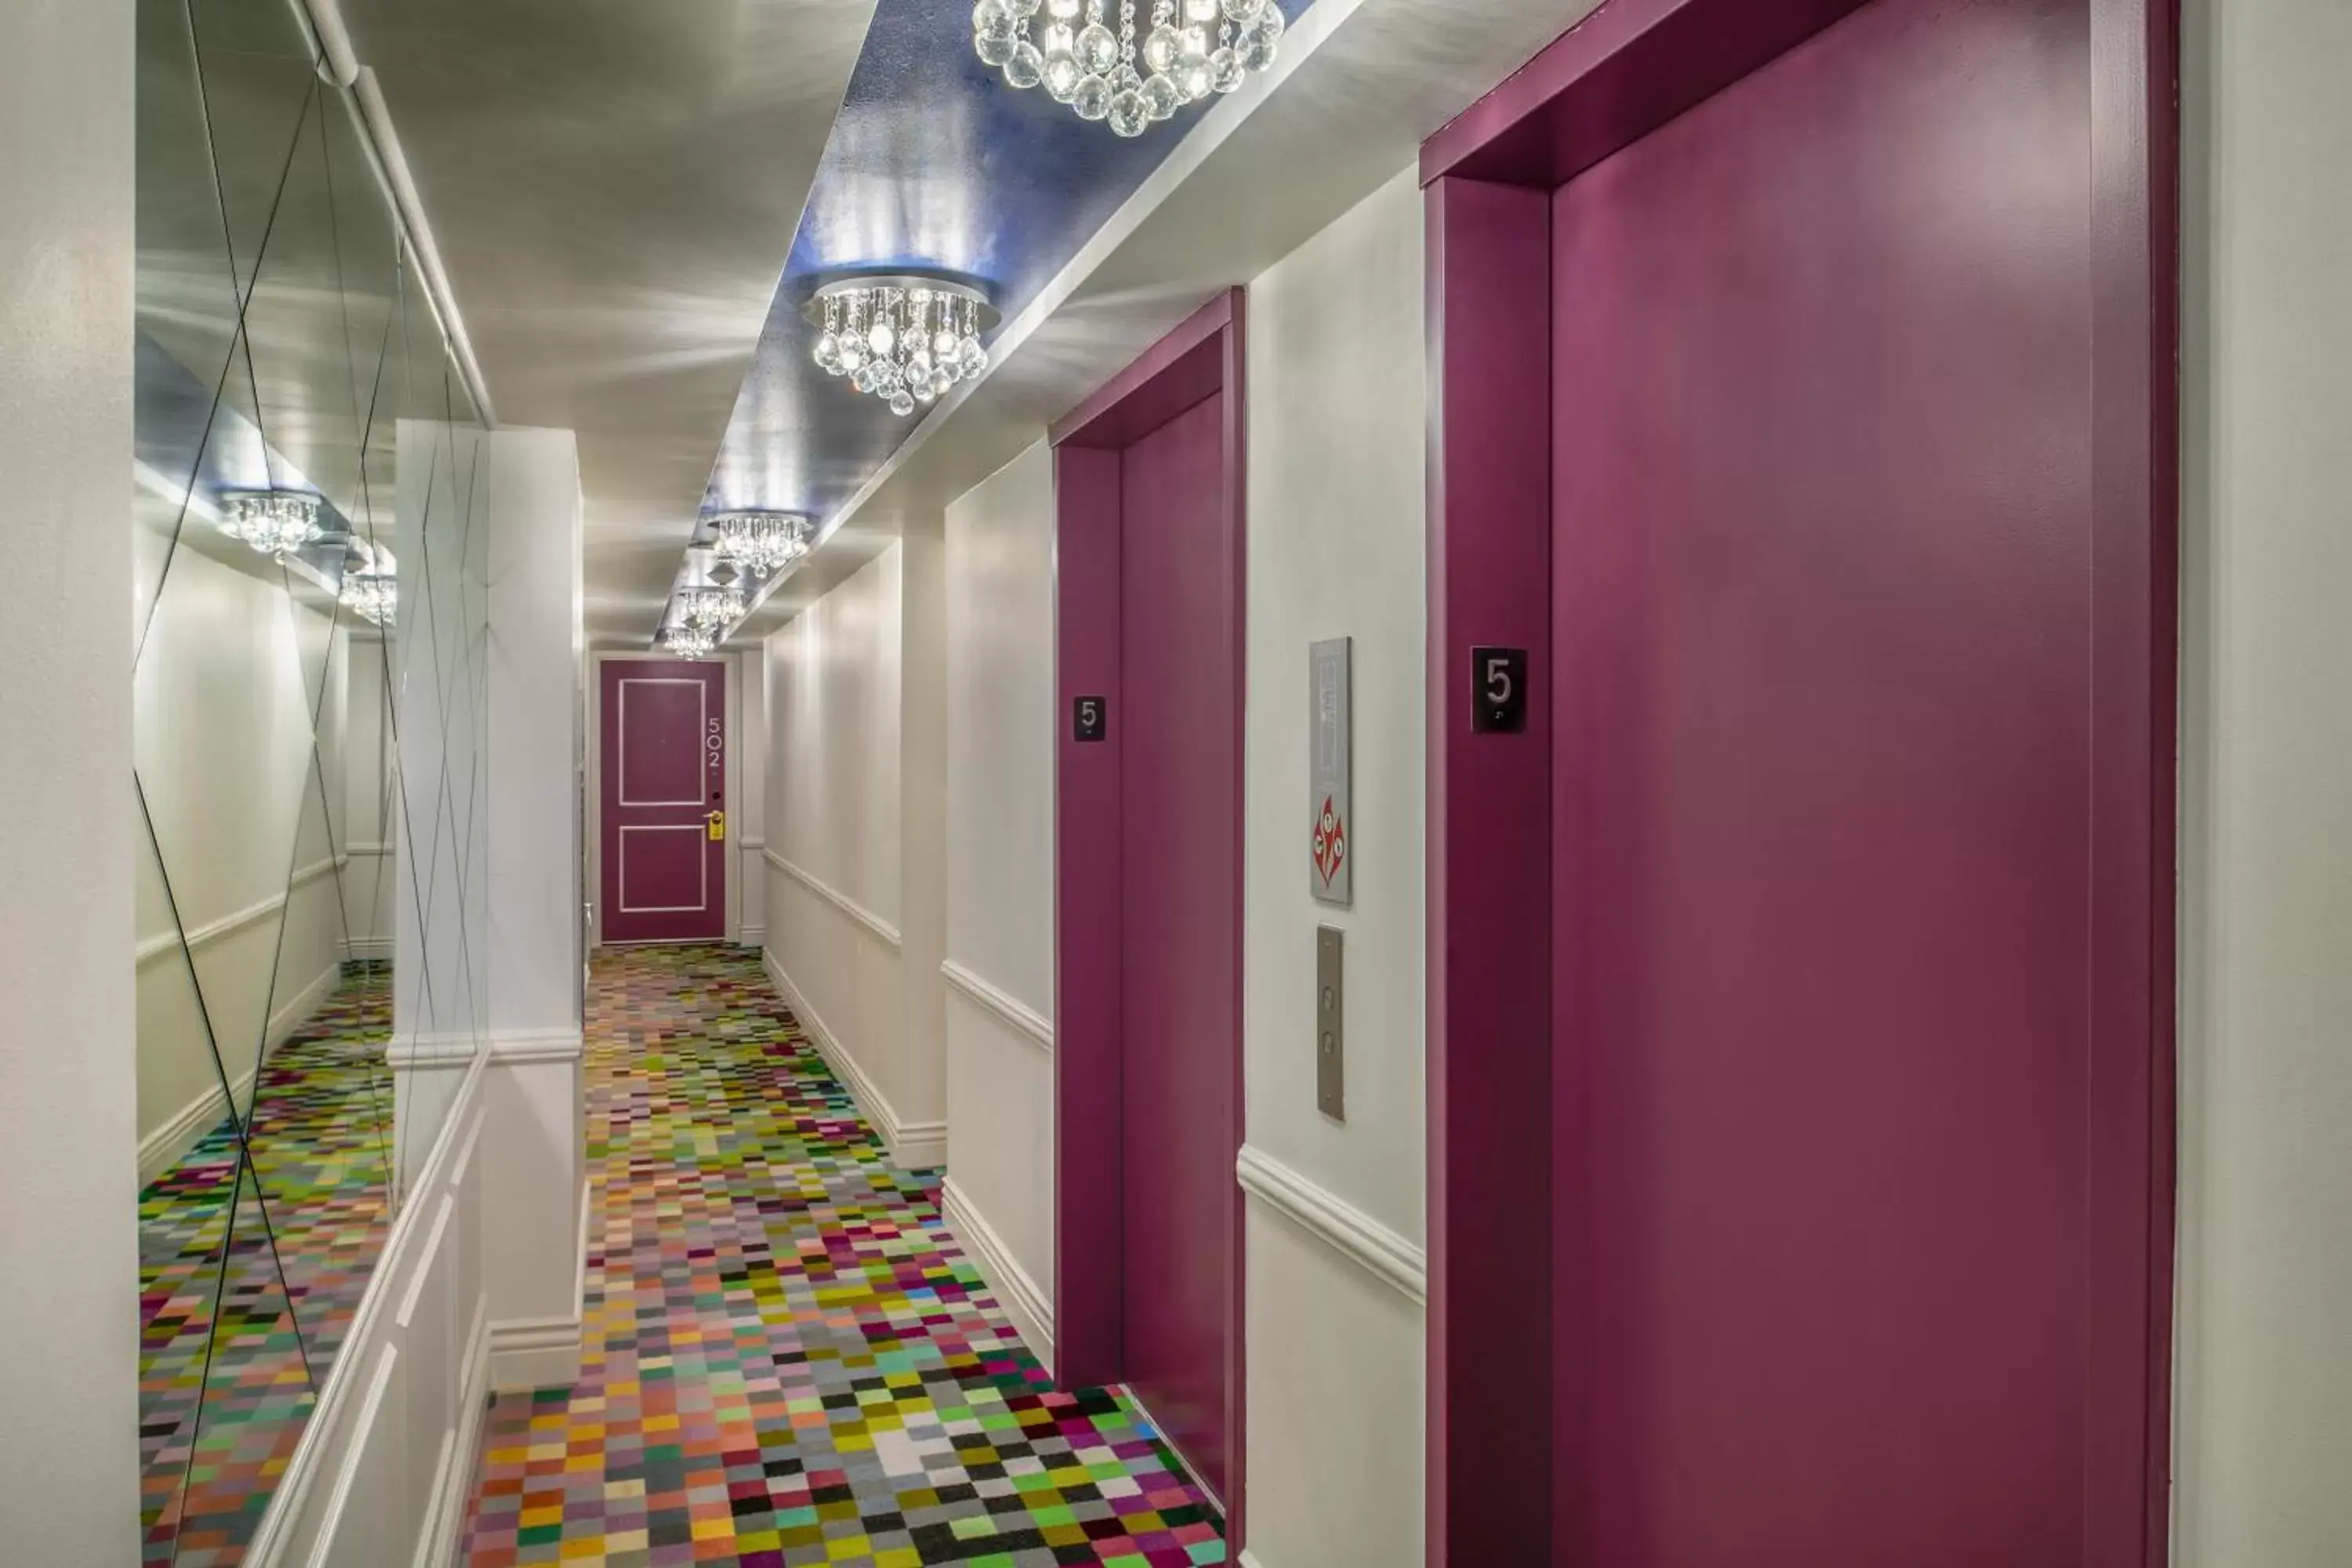 Area and facilities in Staypineapple, An Artful Hotel, Midtown New York